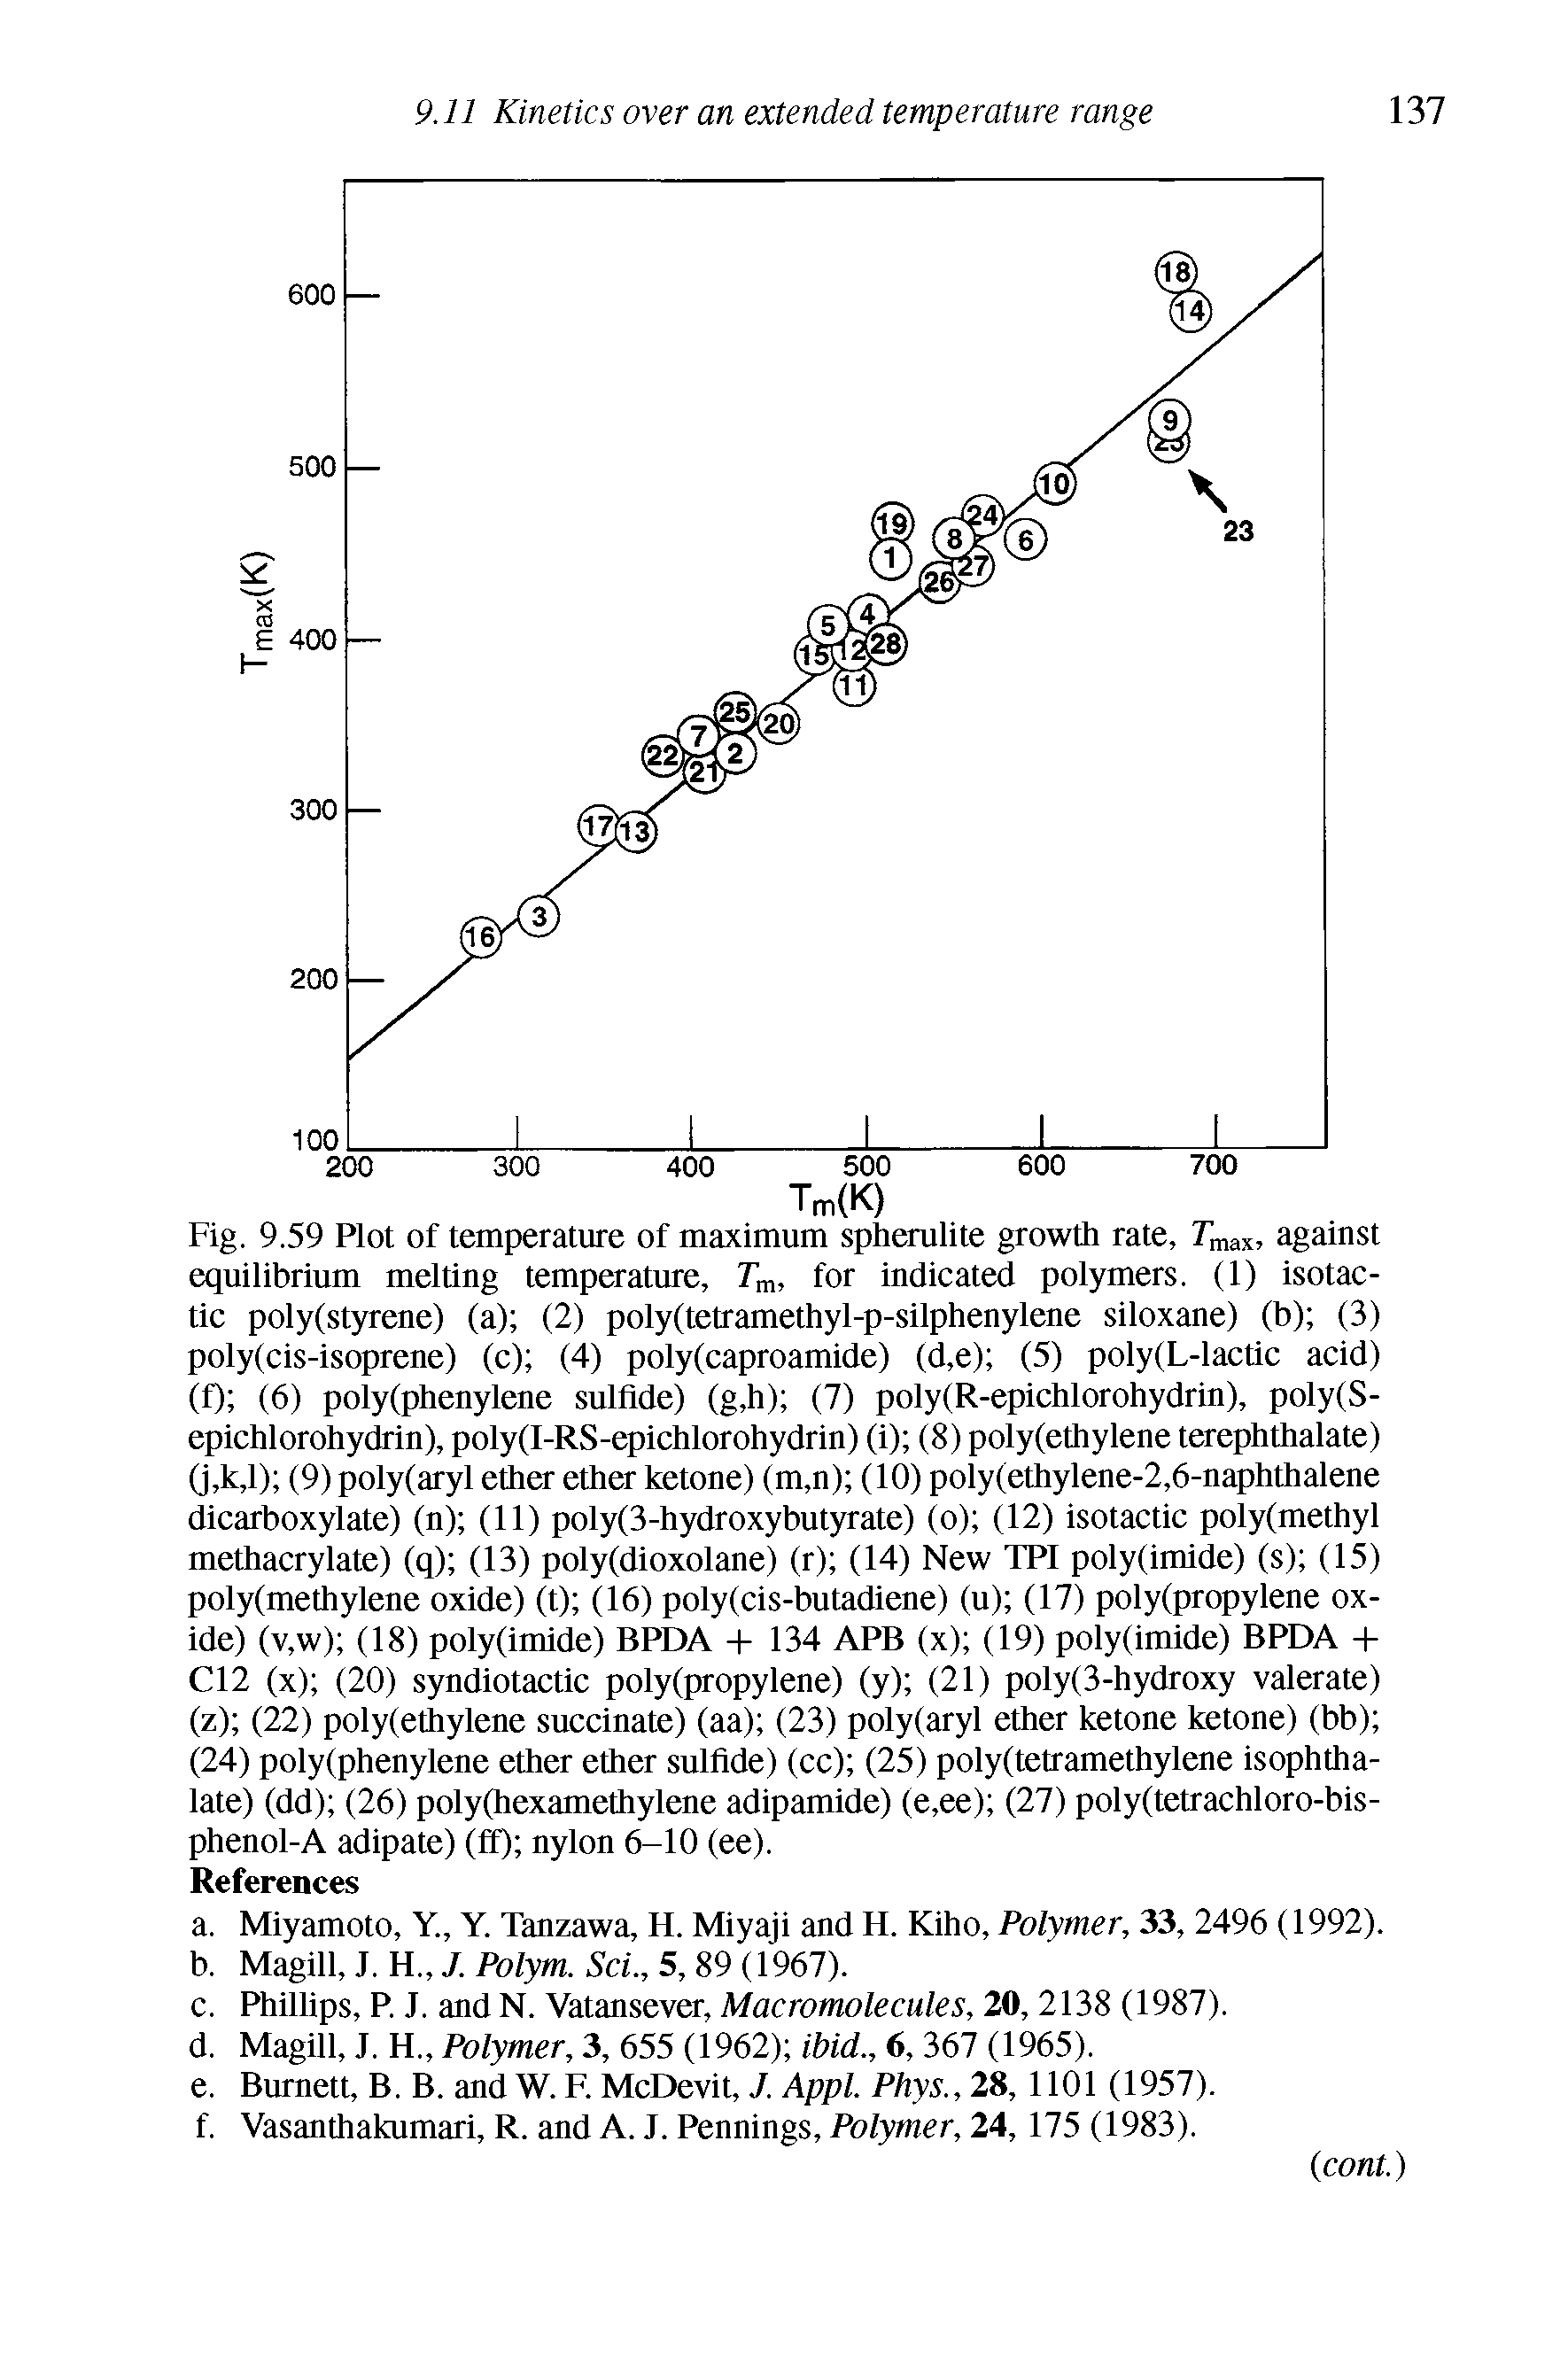 Fig. 9.59 Plot of temperature of maximum spherulite growth rate, Tmax, against equilibrium melting temperature. I m, for indicated polymers. (1) isotactic poly(styrene) (a) (2) poly(tetramethyl-p-silphenylene siloxane) (b) (3) poly(cis-isoprene) (c) (4) poly(caproamide) (d,e) (5) poly(L-lactic acid) (f) (6) poly(phenylene sulfide) (g,h) (7) poly(R-epichlorohydrin), poly(S-epichlorohydrin), poly(I-RS-epichlorohydrin) (i) (8) poly(ethylene terephthalate) (j,k,l) (9) poly(aryl ether ether ketone) (m,n) (10) poly(ethylene-2,6-naphthalene dicarboxylate) (n) (11) poly(3-hydroxybutyrate) (o) (12) isotactic poly(methyl methacrylate) (q) (13) poly(dioxolane) (r) (14) New TPI poly(imide) (s) (15) poly(methylene oxide) (t) (16) poly(cis-butadiene) (u) (17) poly(propylene oxide) (v,w) (18) poly(imide) BPDA - - 134 APB (x) (19) poly(imide) BPDA - -C12 (x) (20) syndiotactic poly(propylene) (y) (21) poly(3-hydroxy valerate) (z) (22) poly(ethylene succinate) (aa) (23) poly(aryl ether ketone ketone) (bb) (24) poly(phenylene ether ether sulfide) (cc) (25) poly(tetramethylene isophtha-late) (dd) (26) poly(hexamethylene adipamide) (e,ee) (27) poly(tetrachloro-bis-phenol-A adipate) (fQ nylon 6-10 (ee).